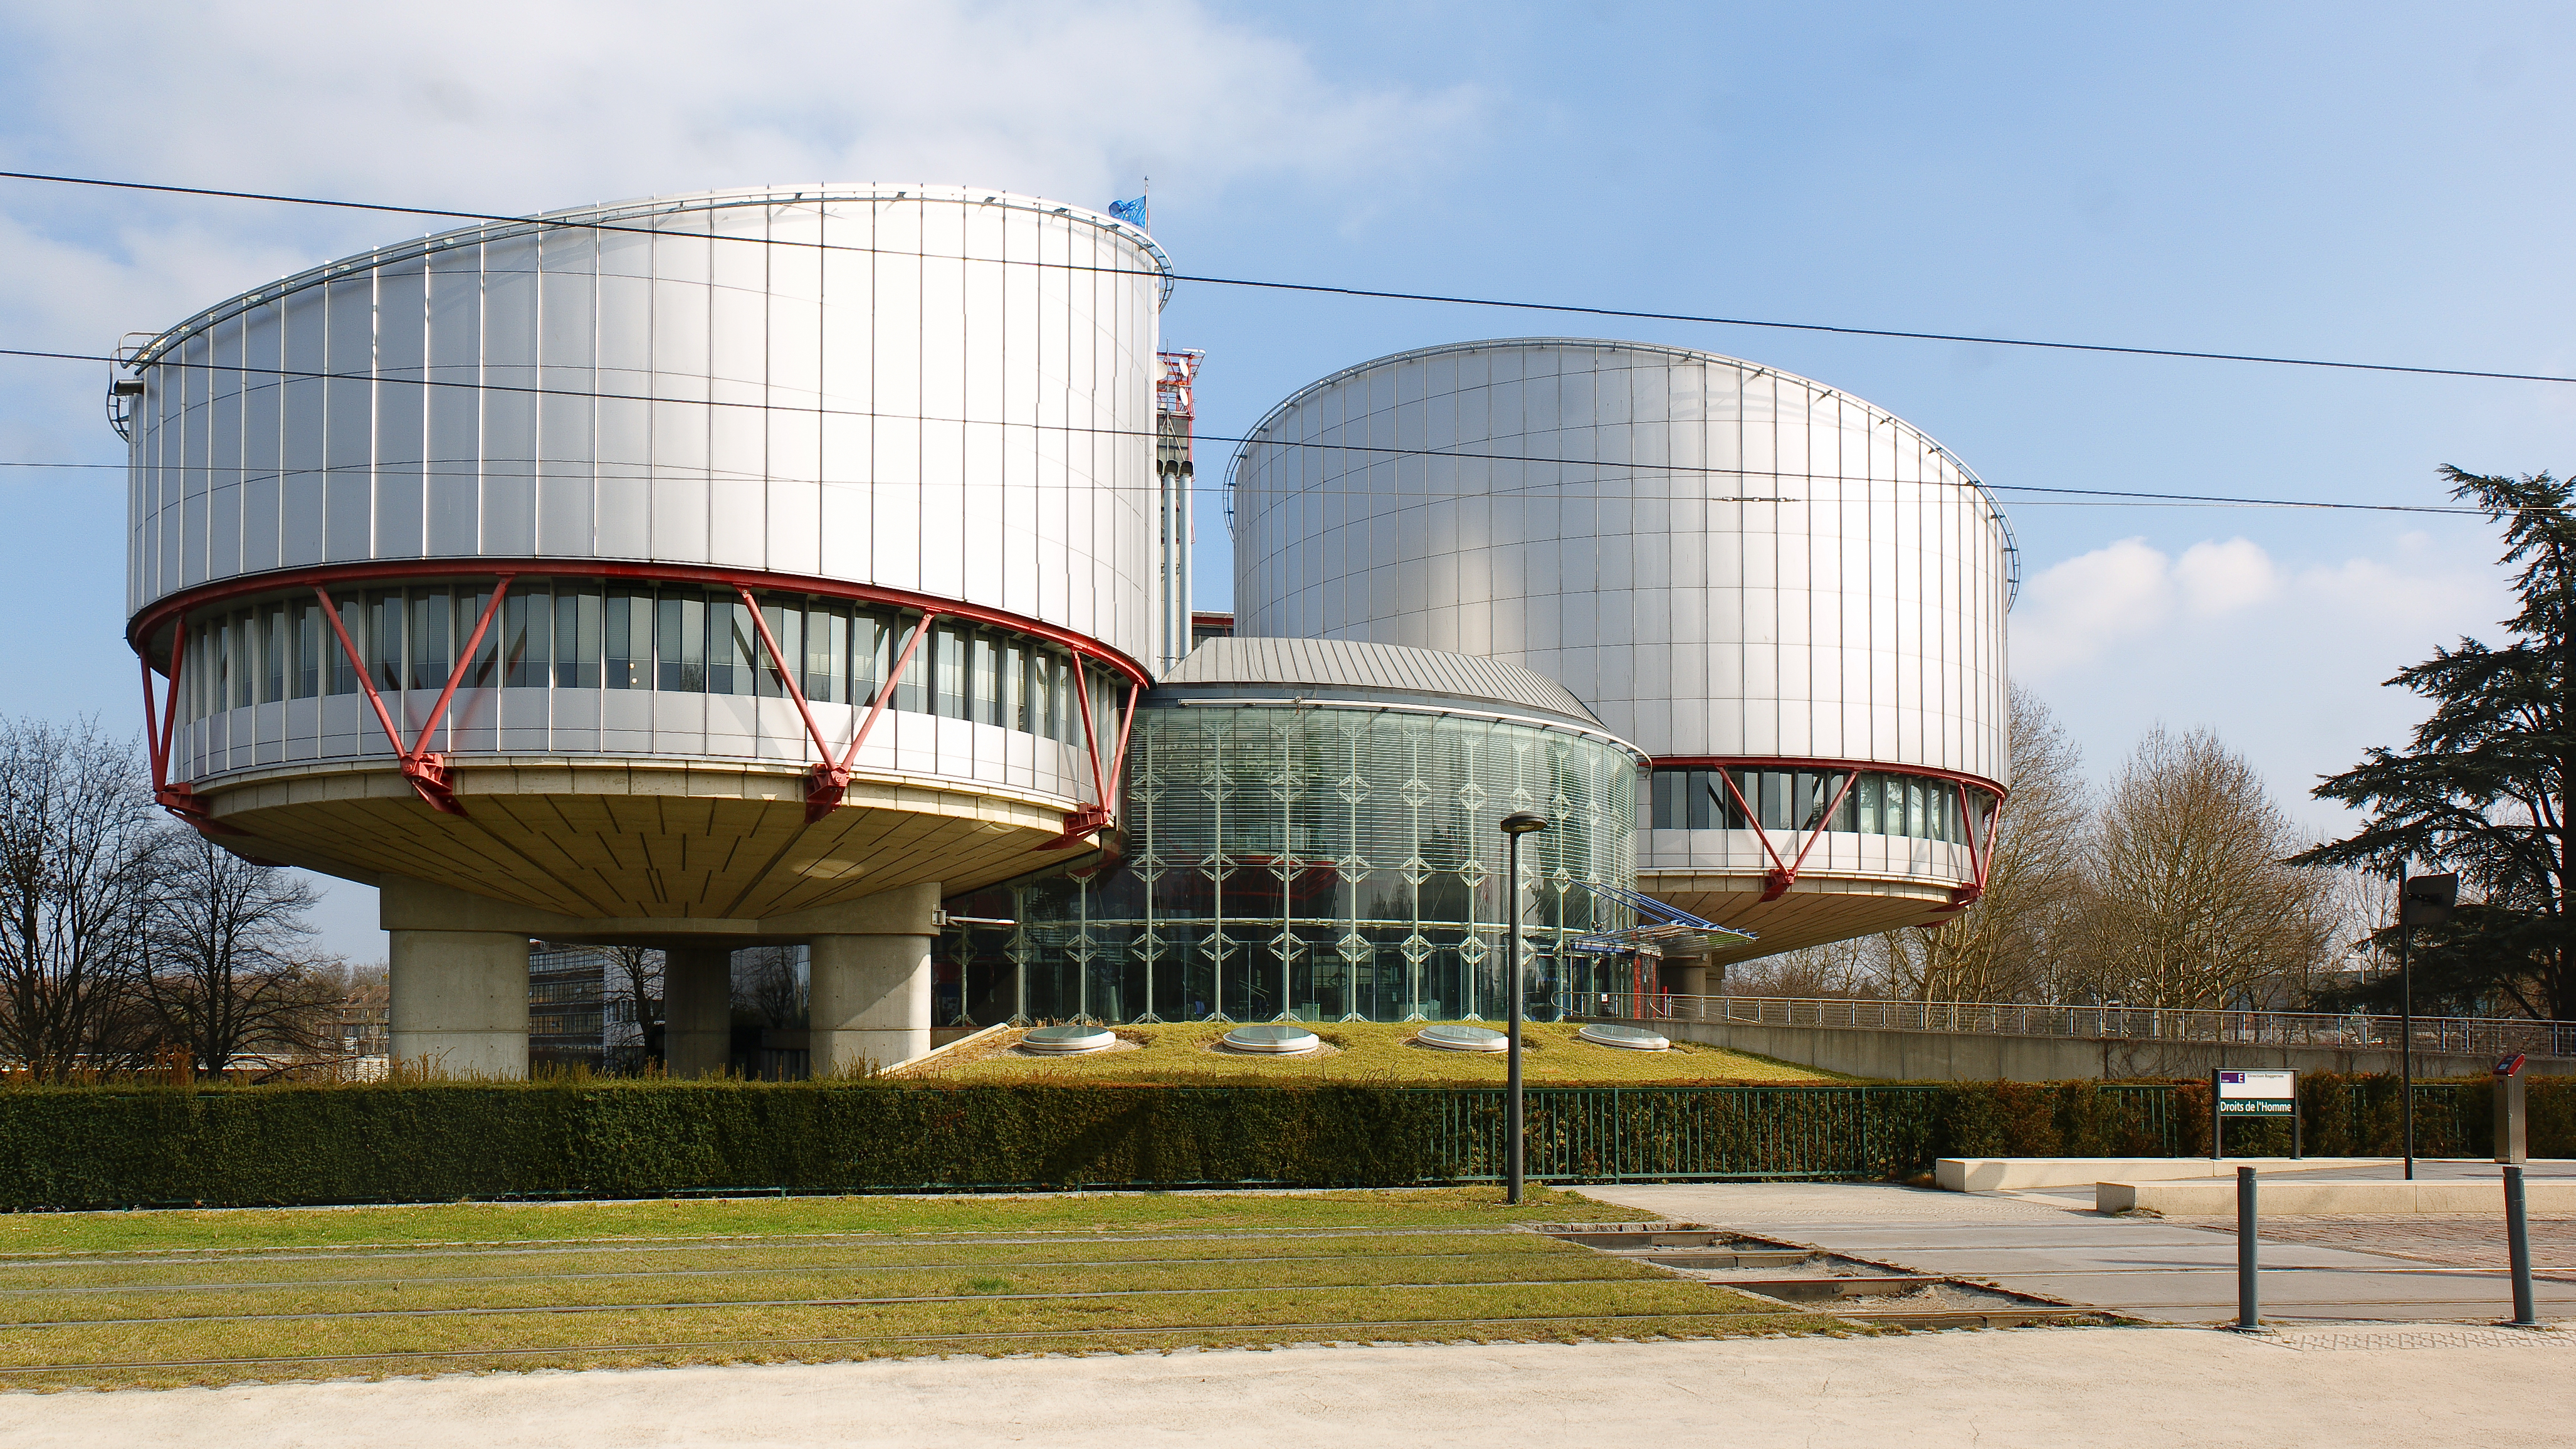 ECHR hears oral arguments from Ukraine in case over Russian occupation of Crimea